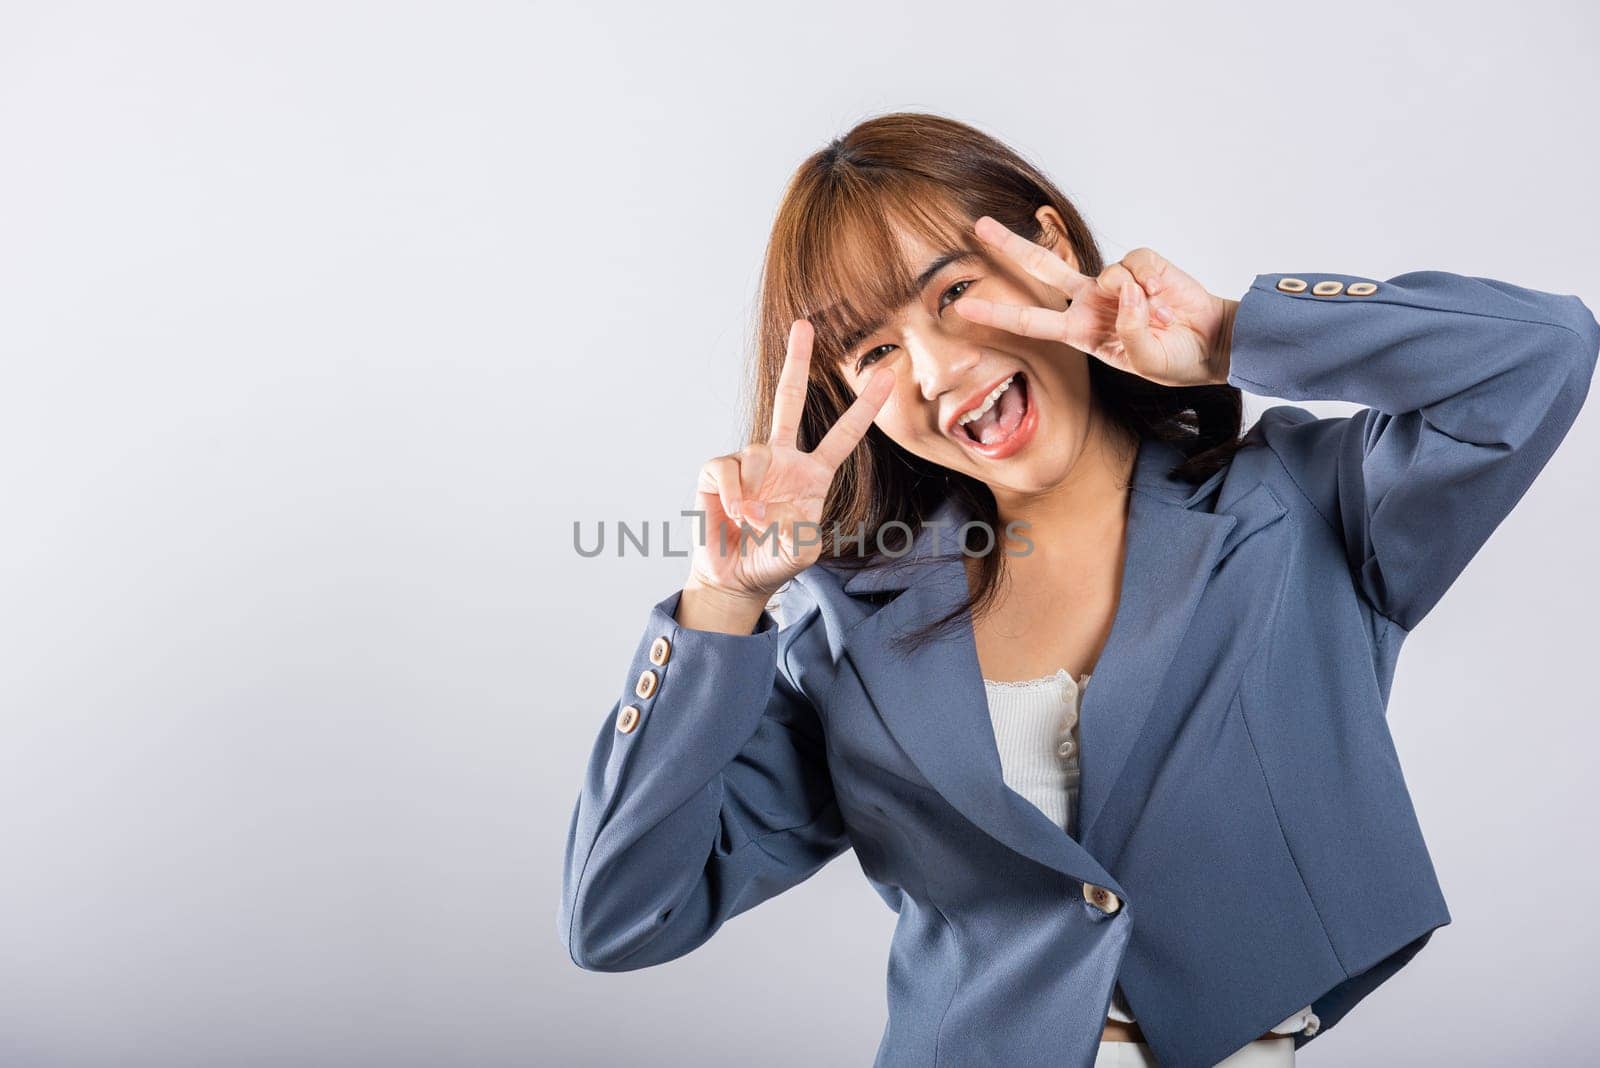 A young Asian woman, photographed in a studio, creatively uses her fingers to display victory and peace signs near her eye. The white background provides a clean canvas for your message.